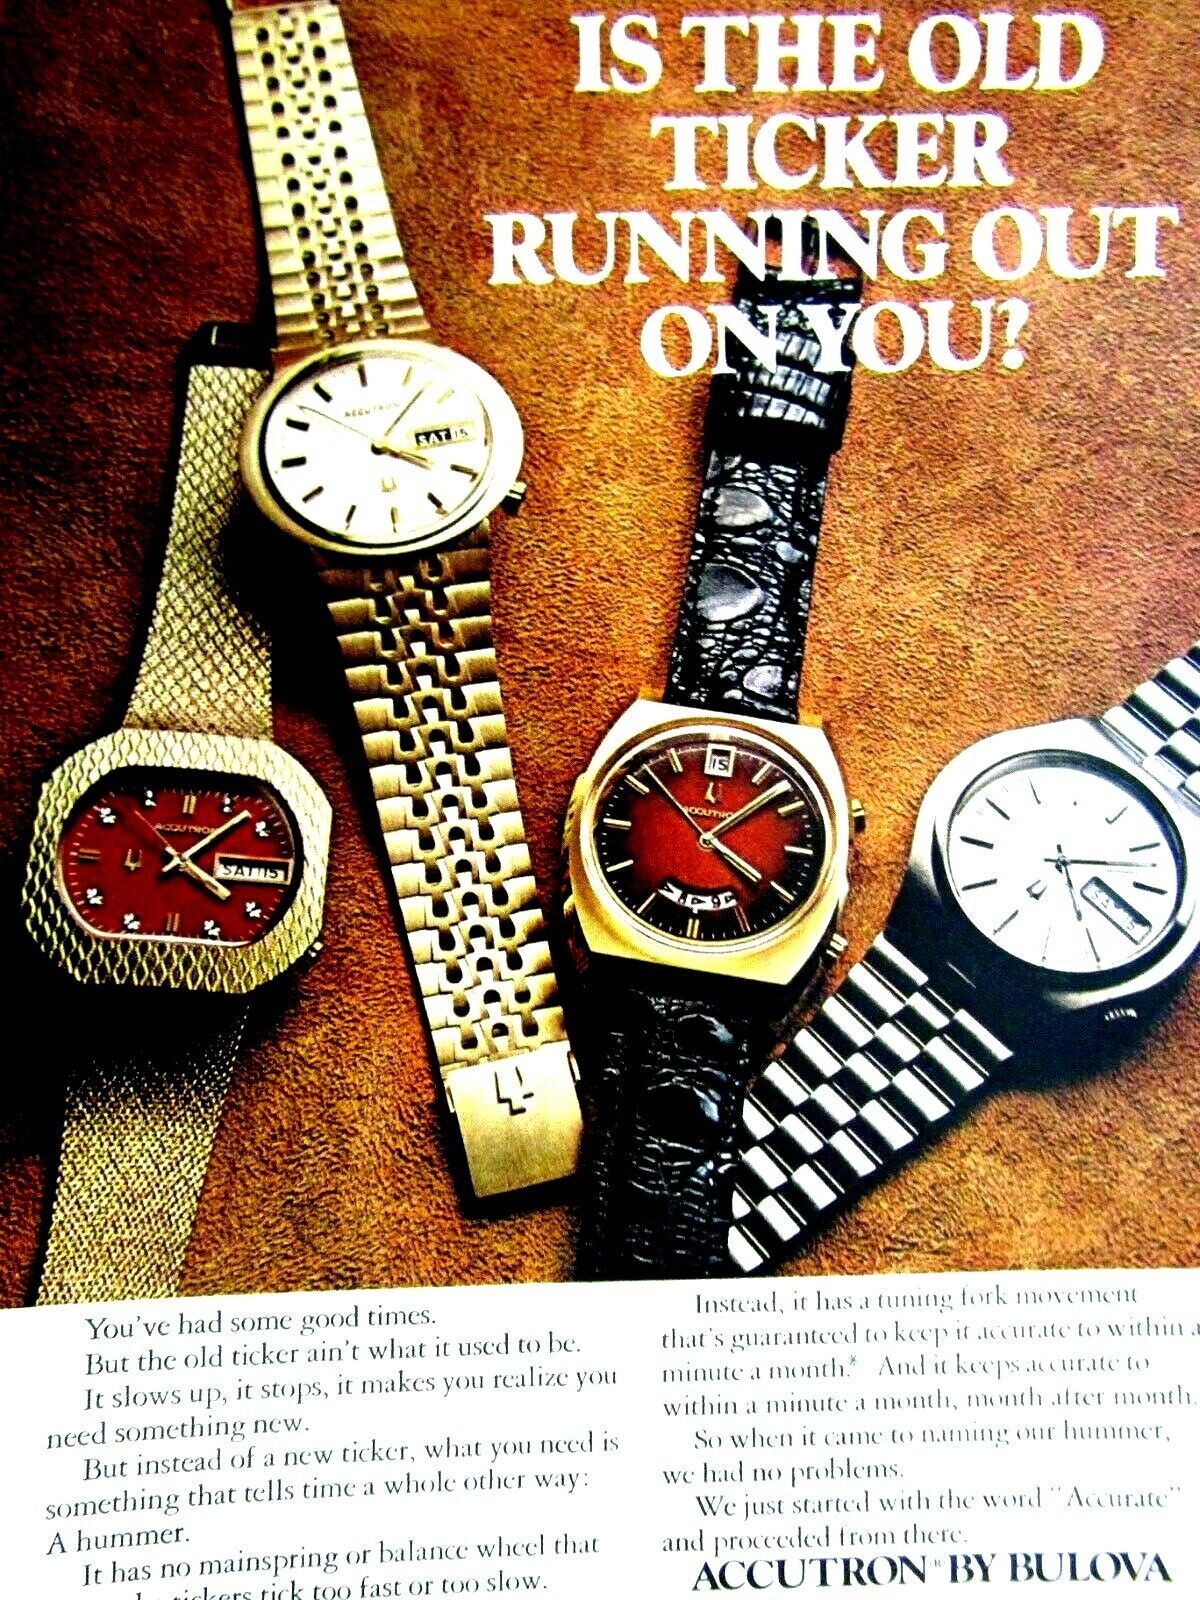 1972 Bulova Accutron The Old Ticker Running Out On You Vintage Original Print Ad